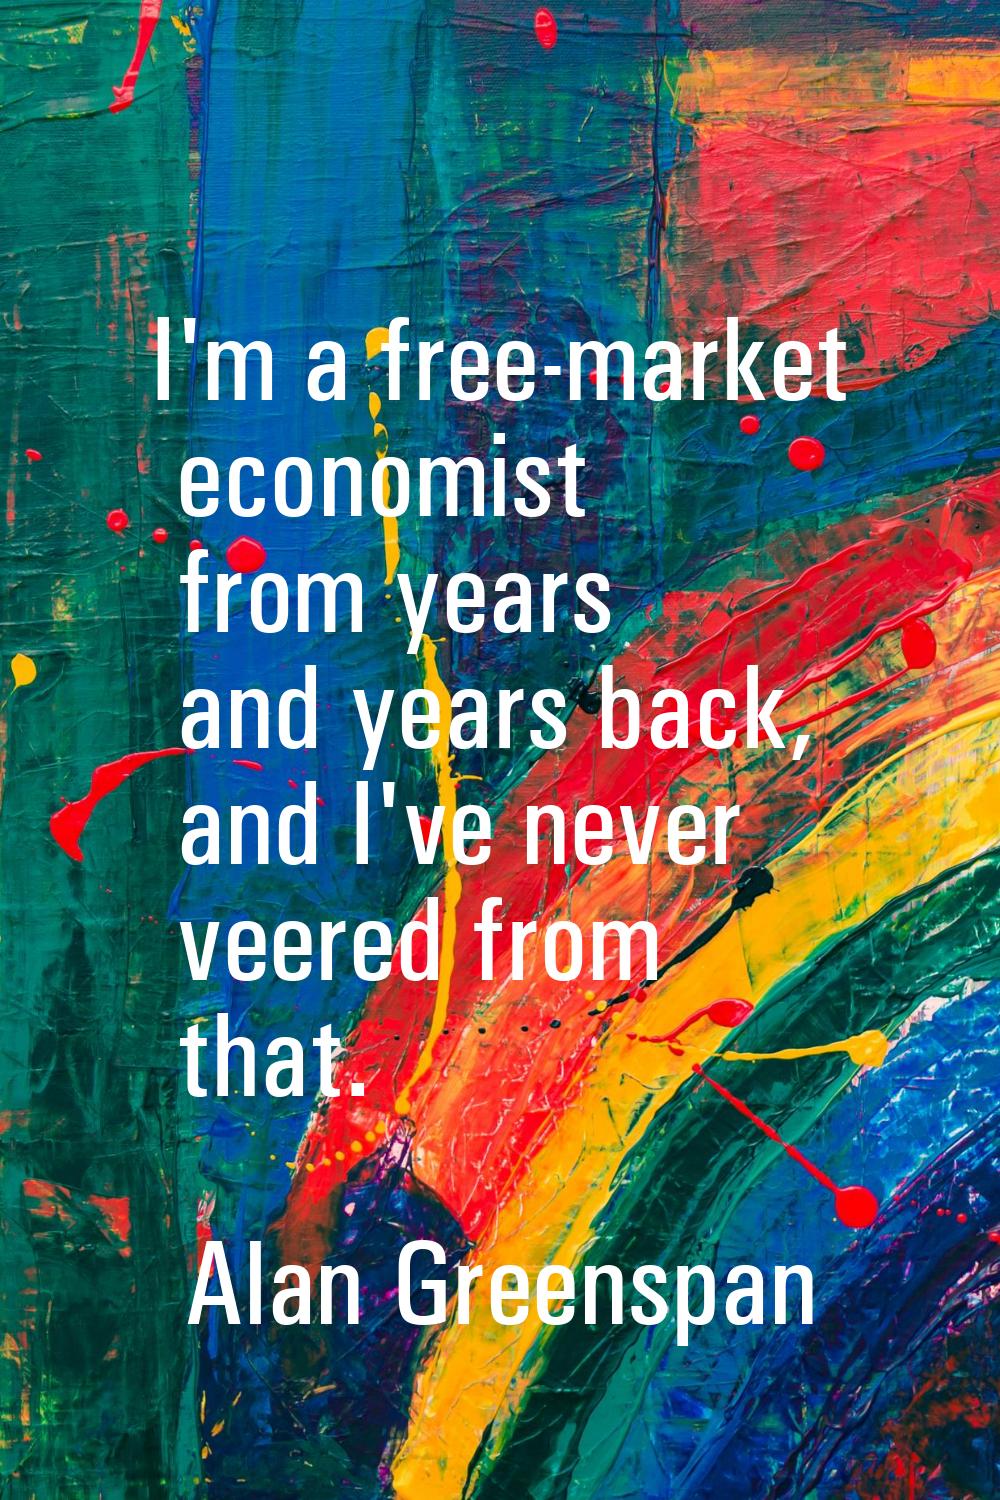 I'm a free-market economist from years and years back, and I've never veered from that.